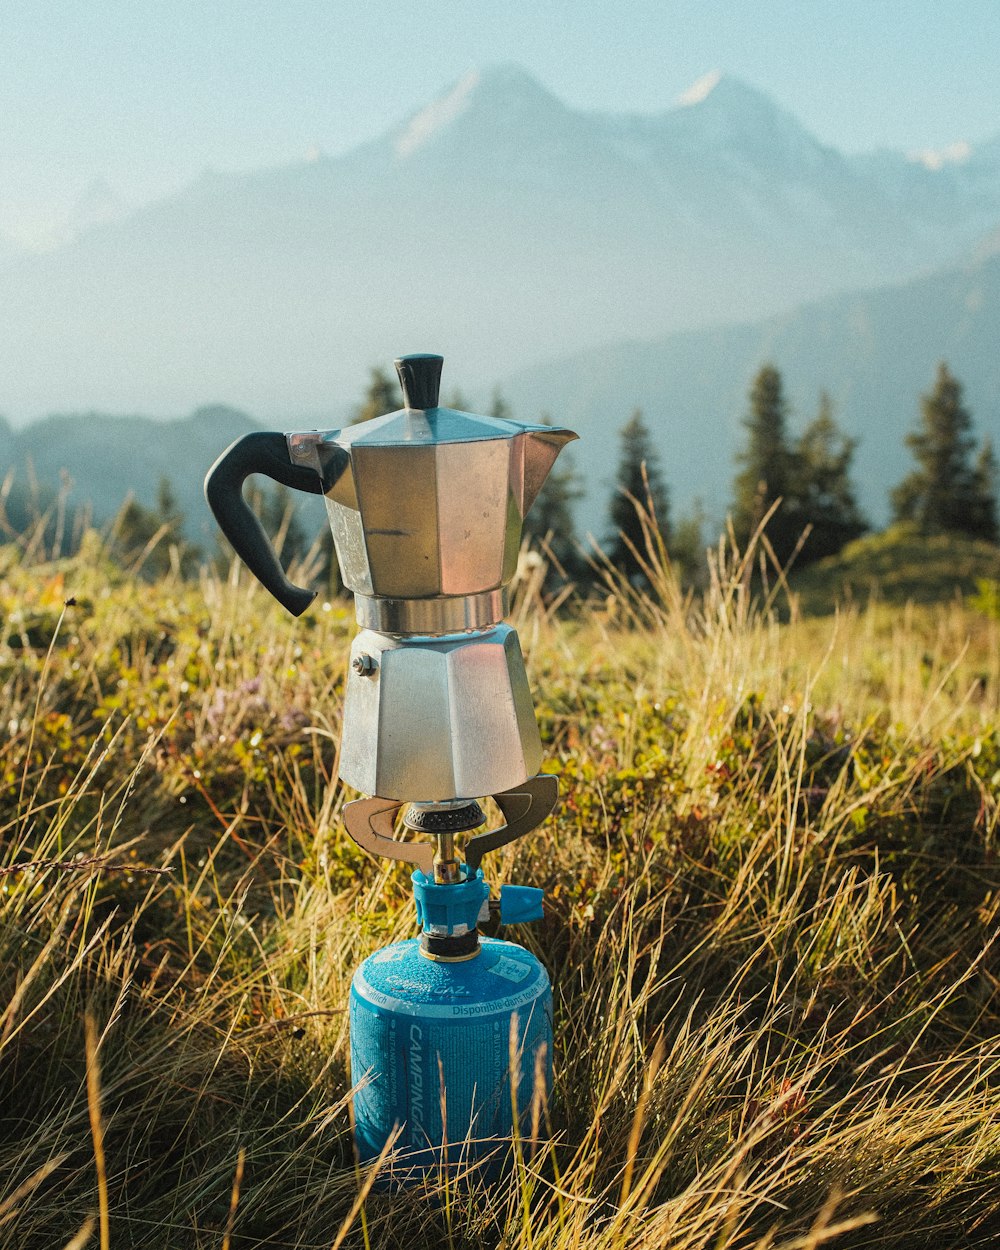 blue and silver coffee pot on green grass field during daytime